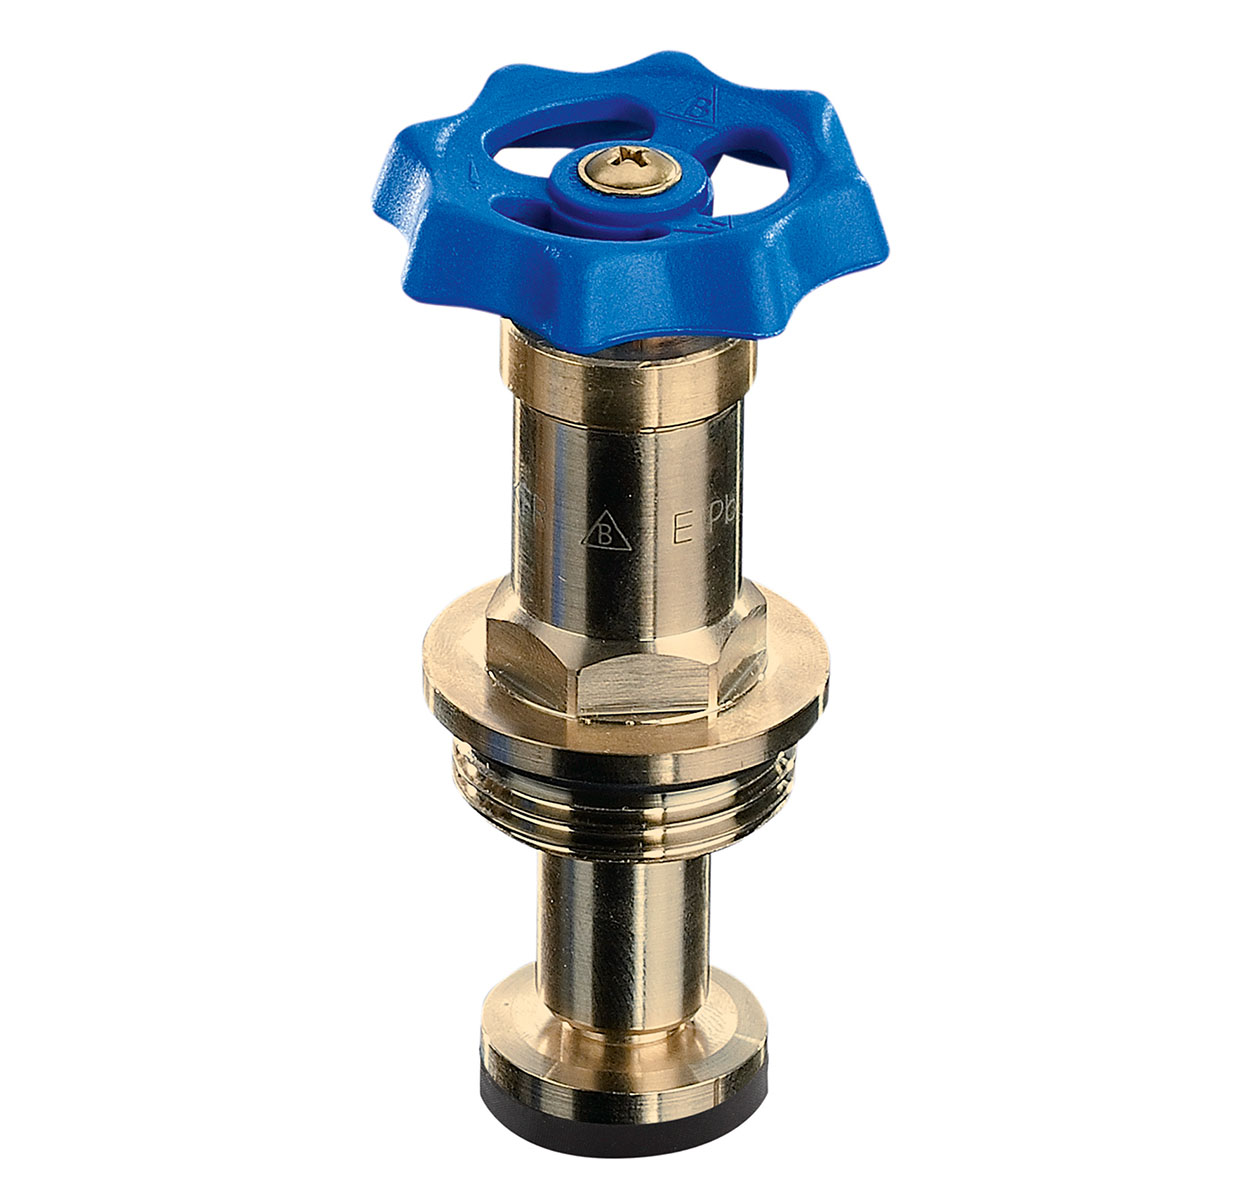 7514500 - long-life ECOCAST upper-part with grease chamber Long-life, for free-flow valves